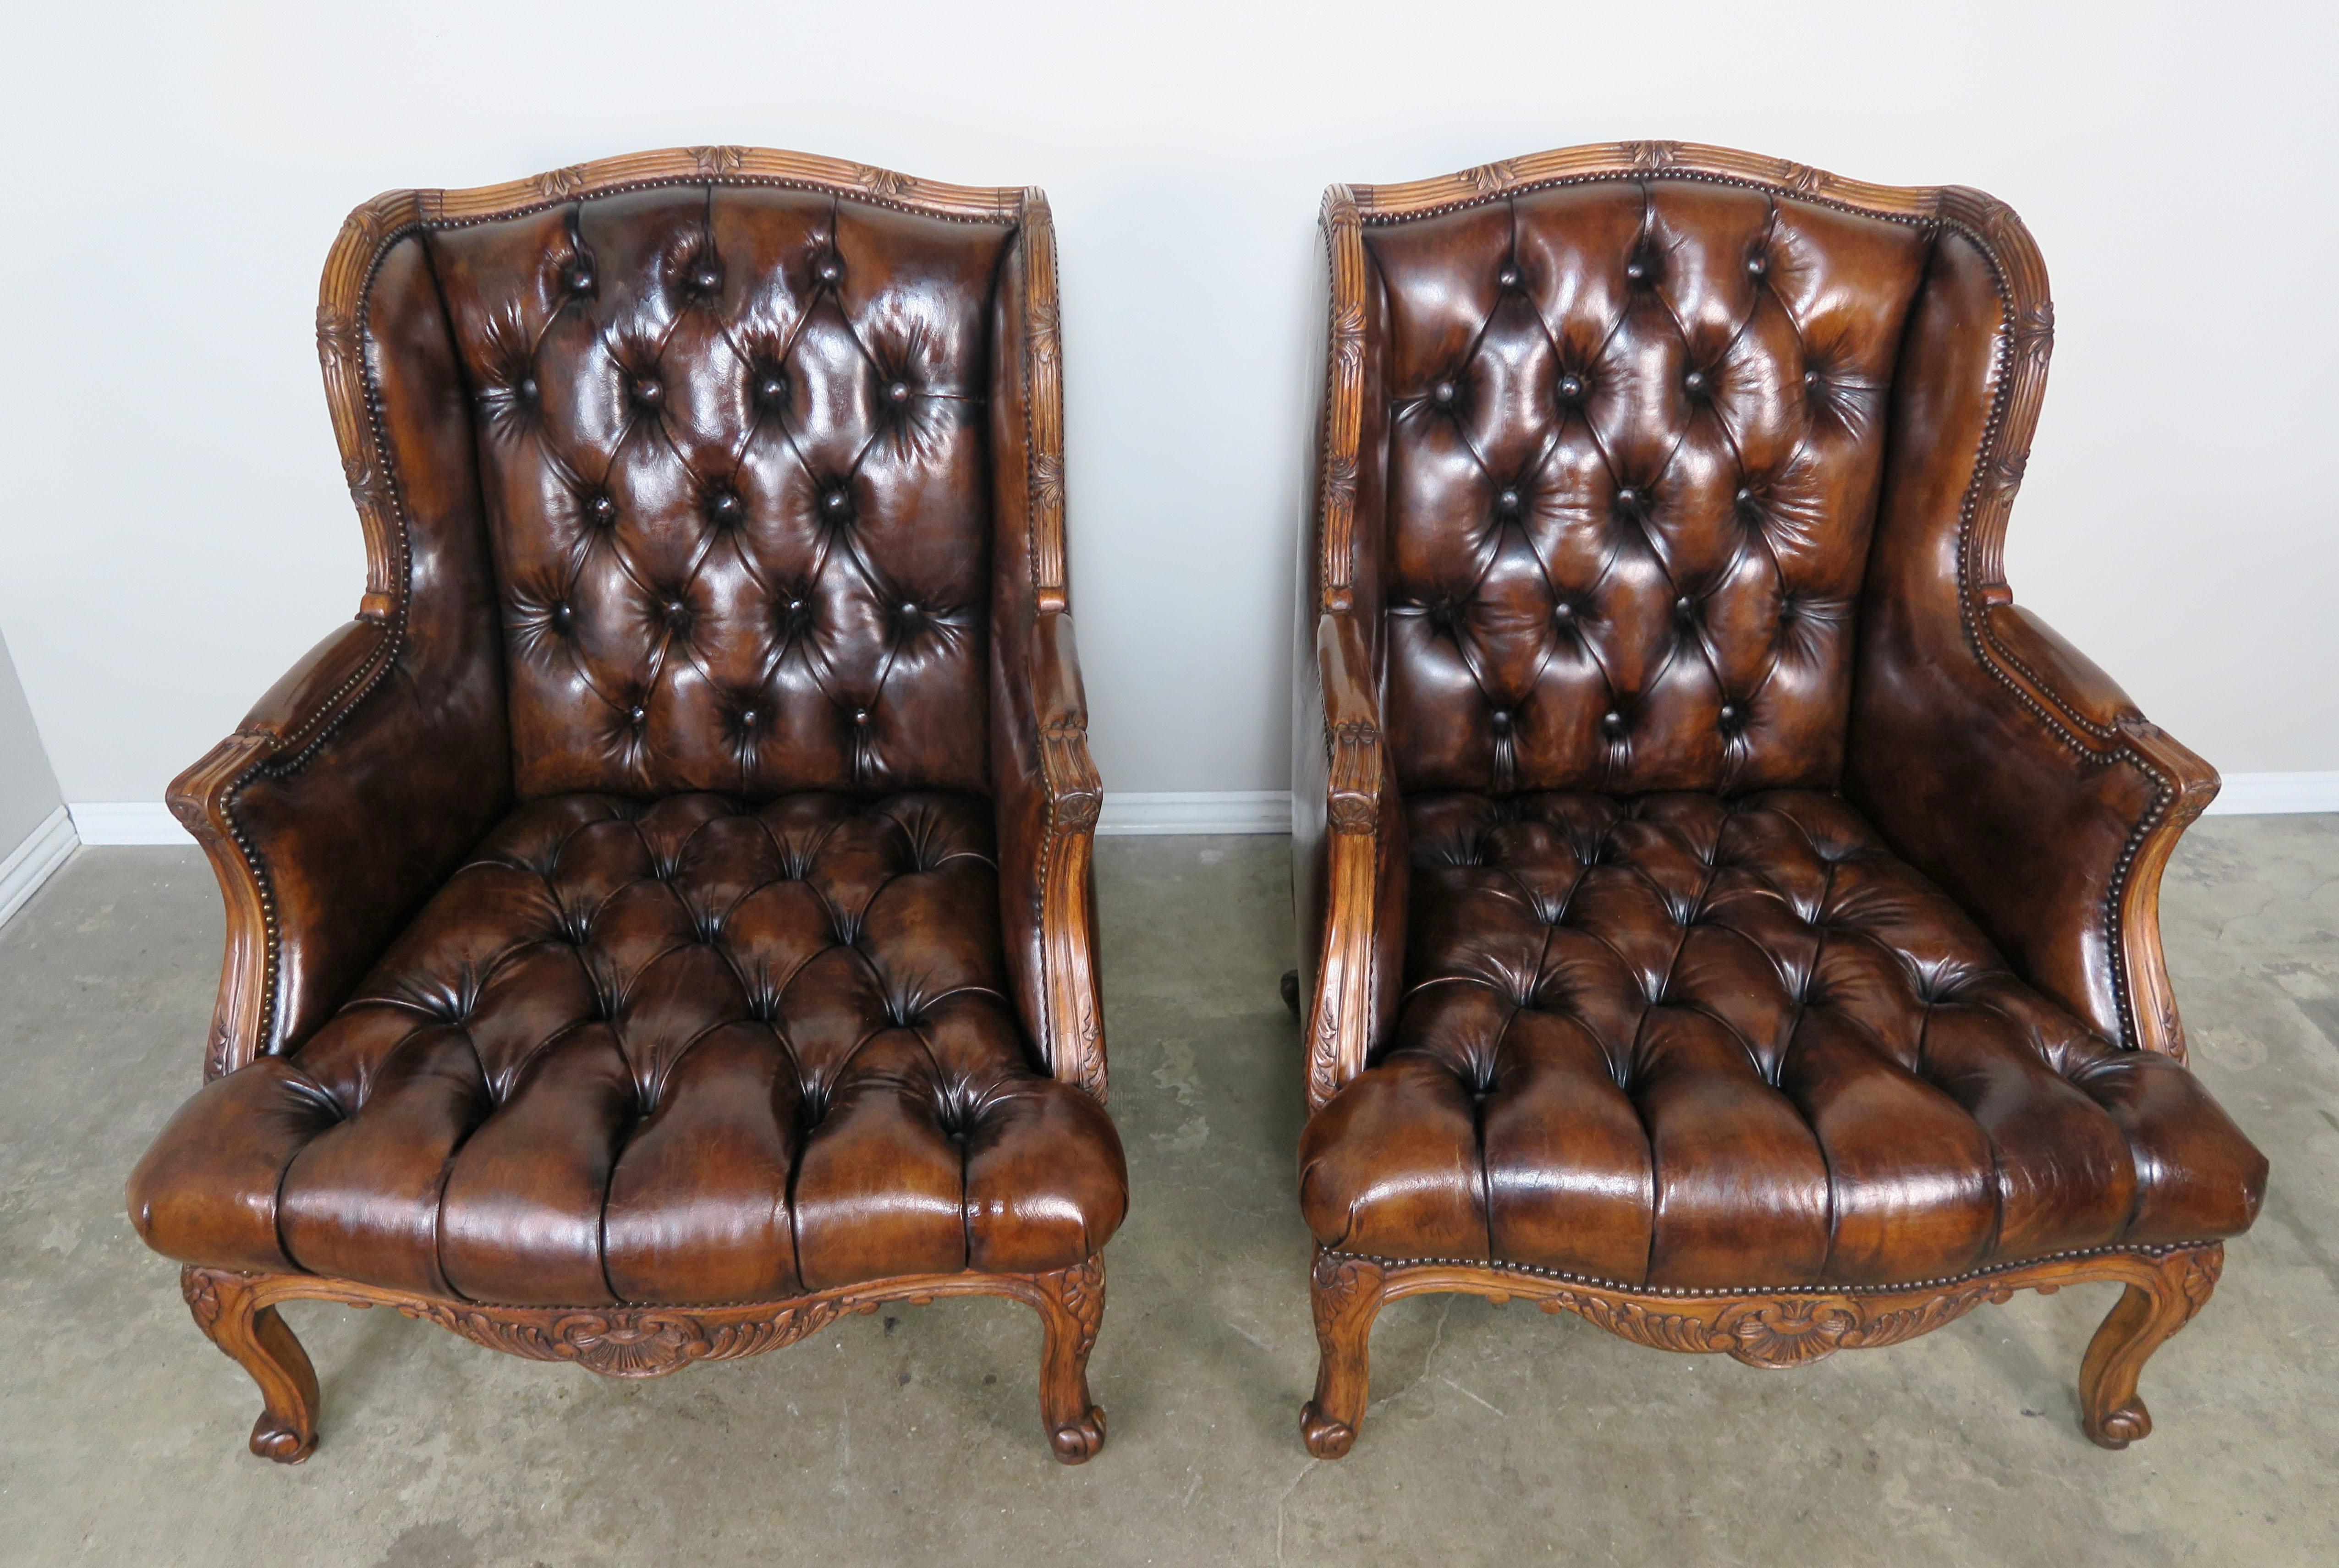 Mid-20th Century Pair of French Leather Tufted Armchairs with Matching Ottomans